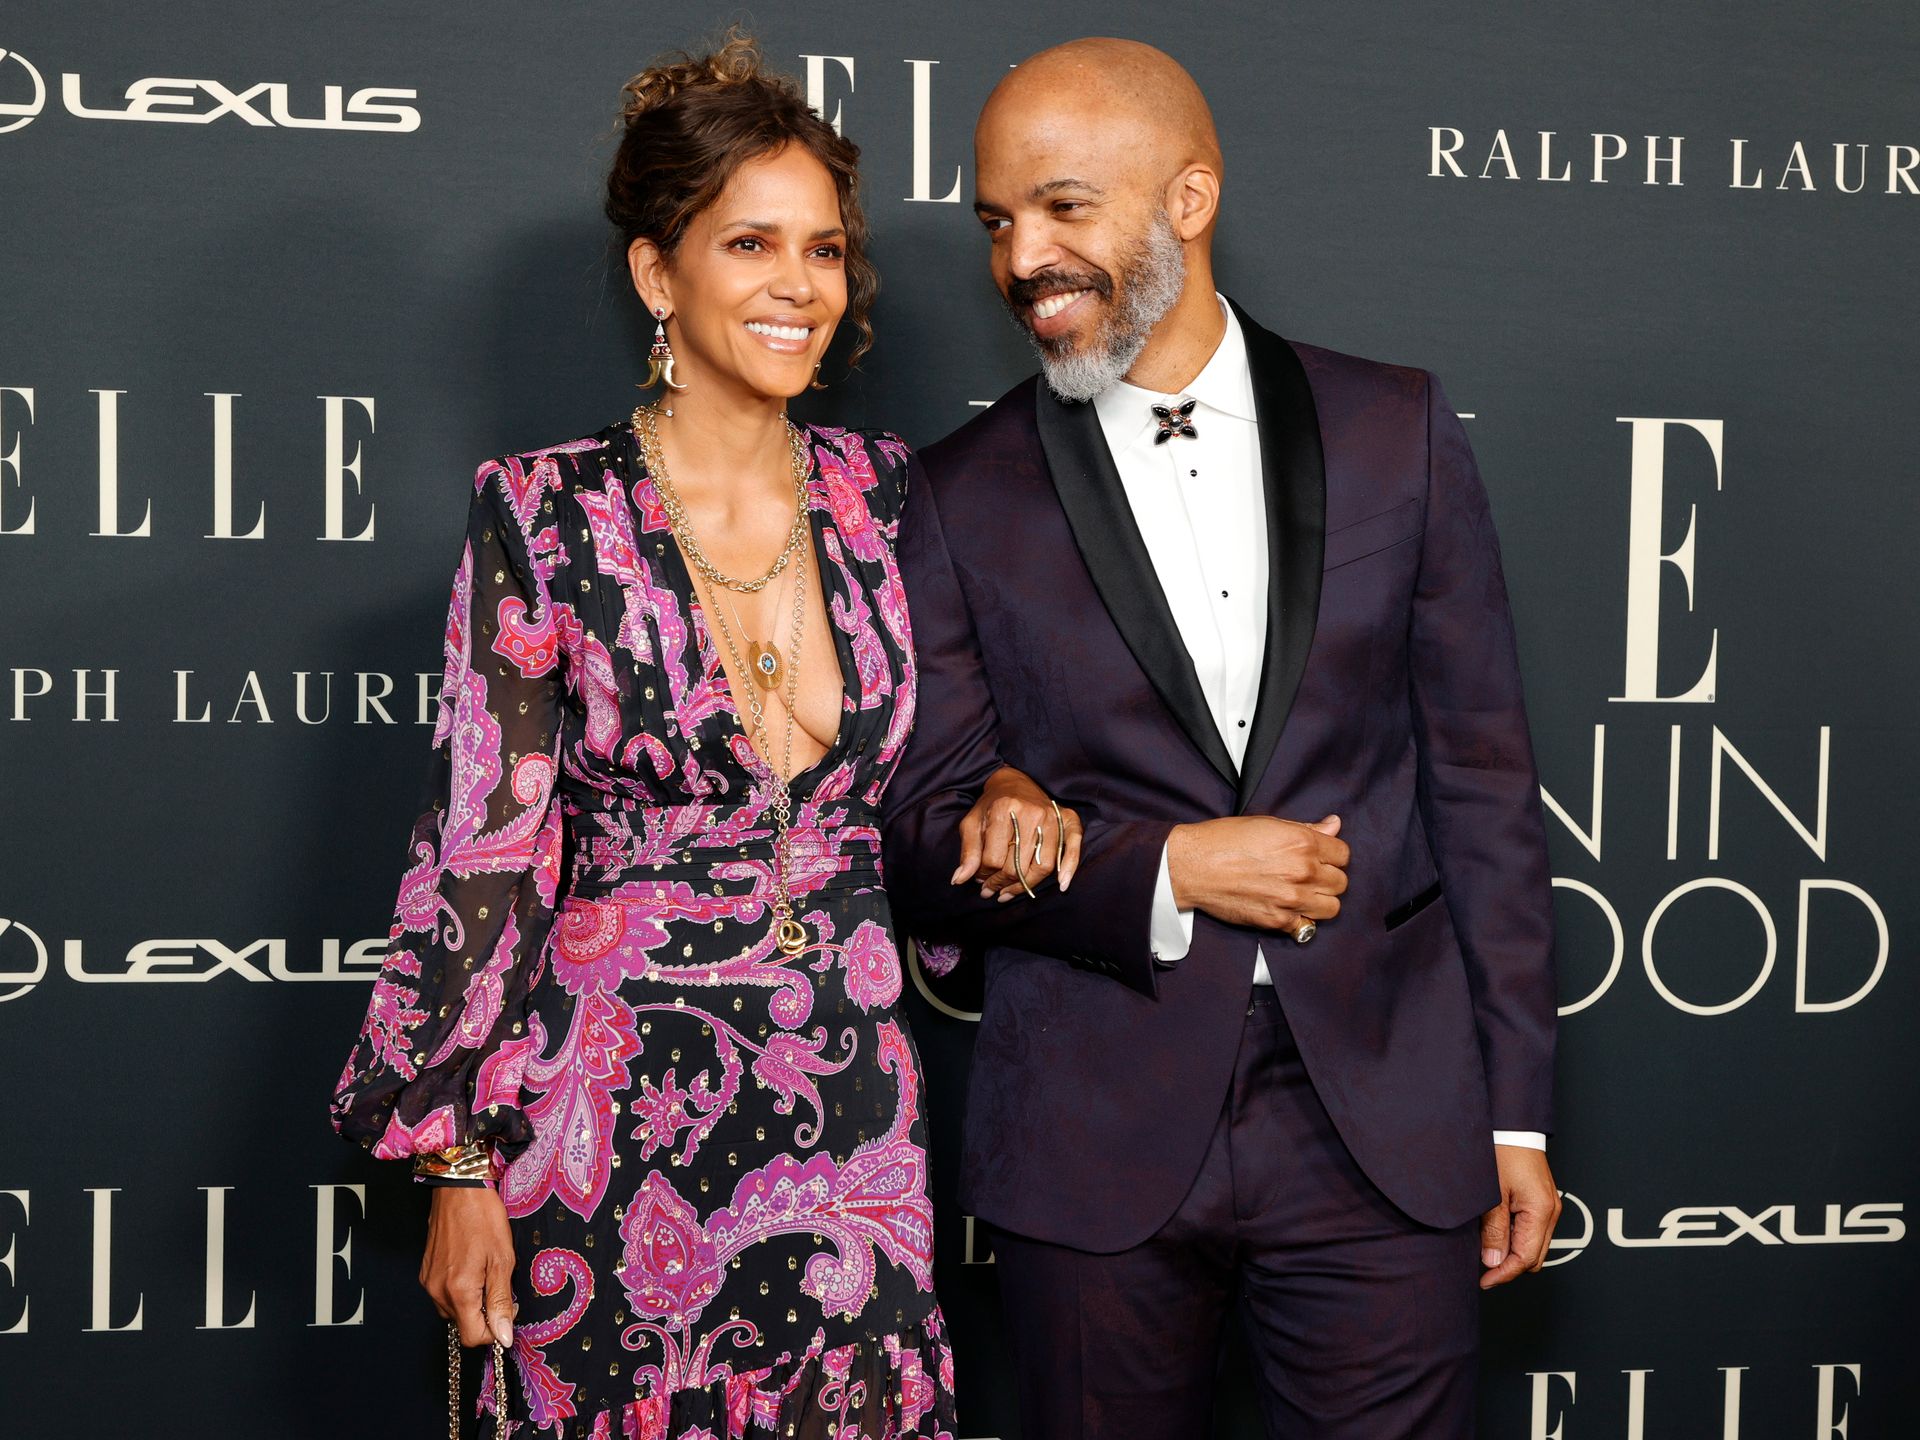 Halle Berry rocks plunging dress with high slits for rare